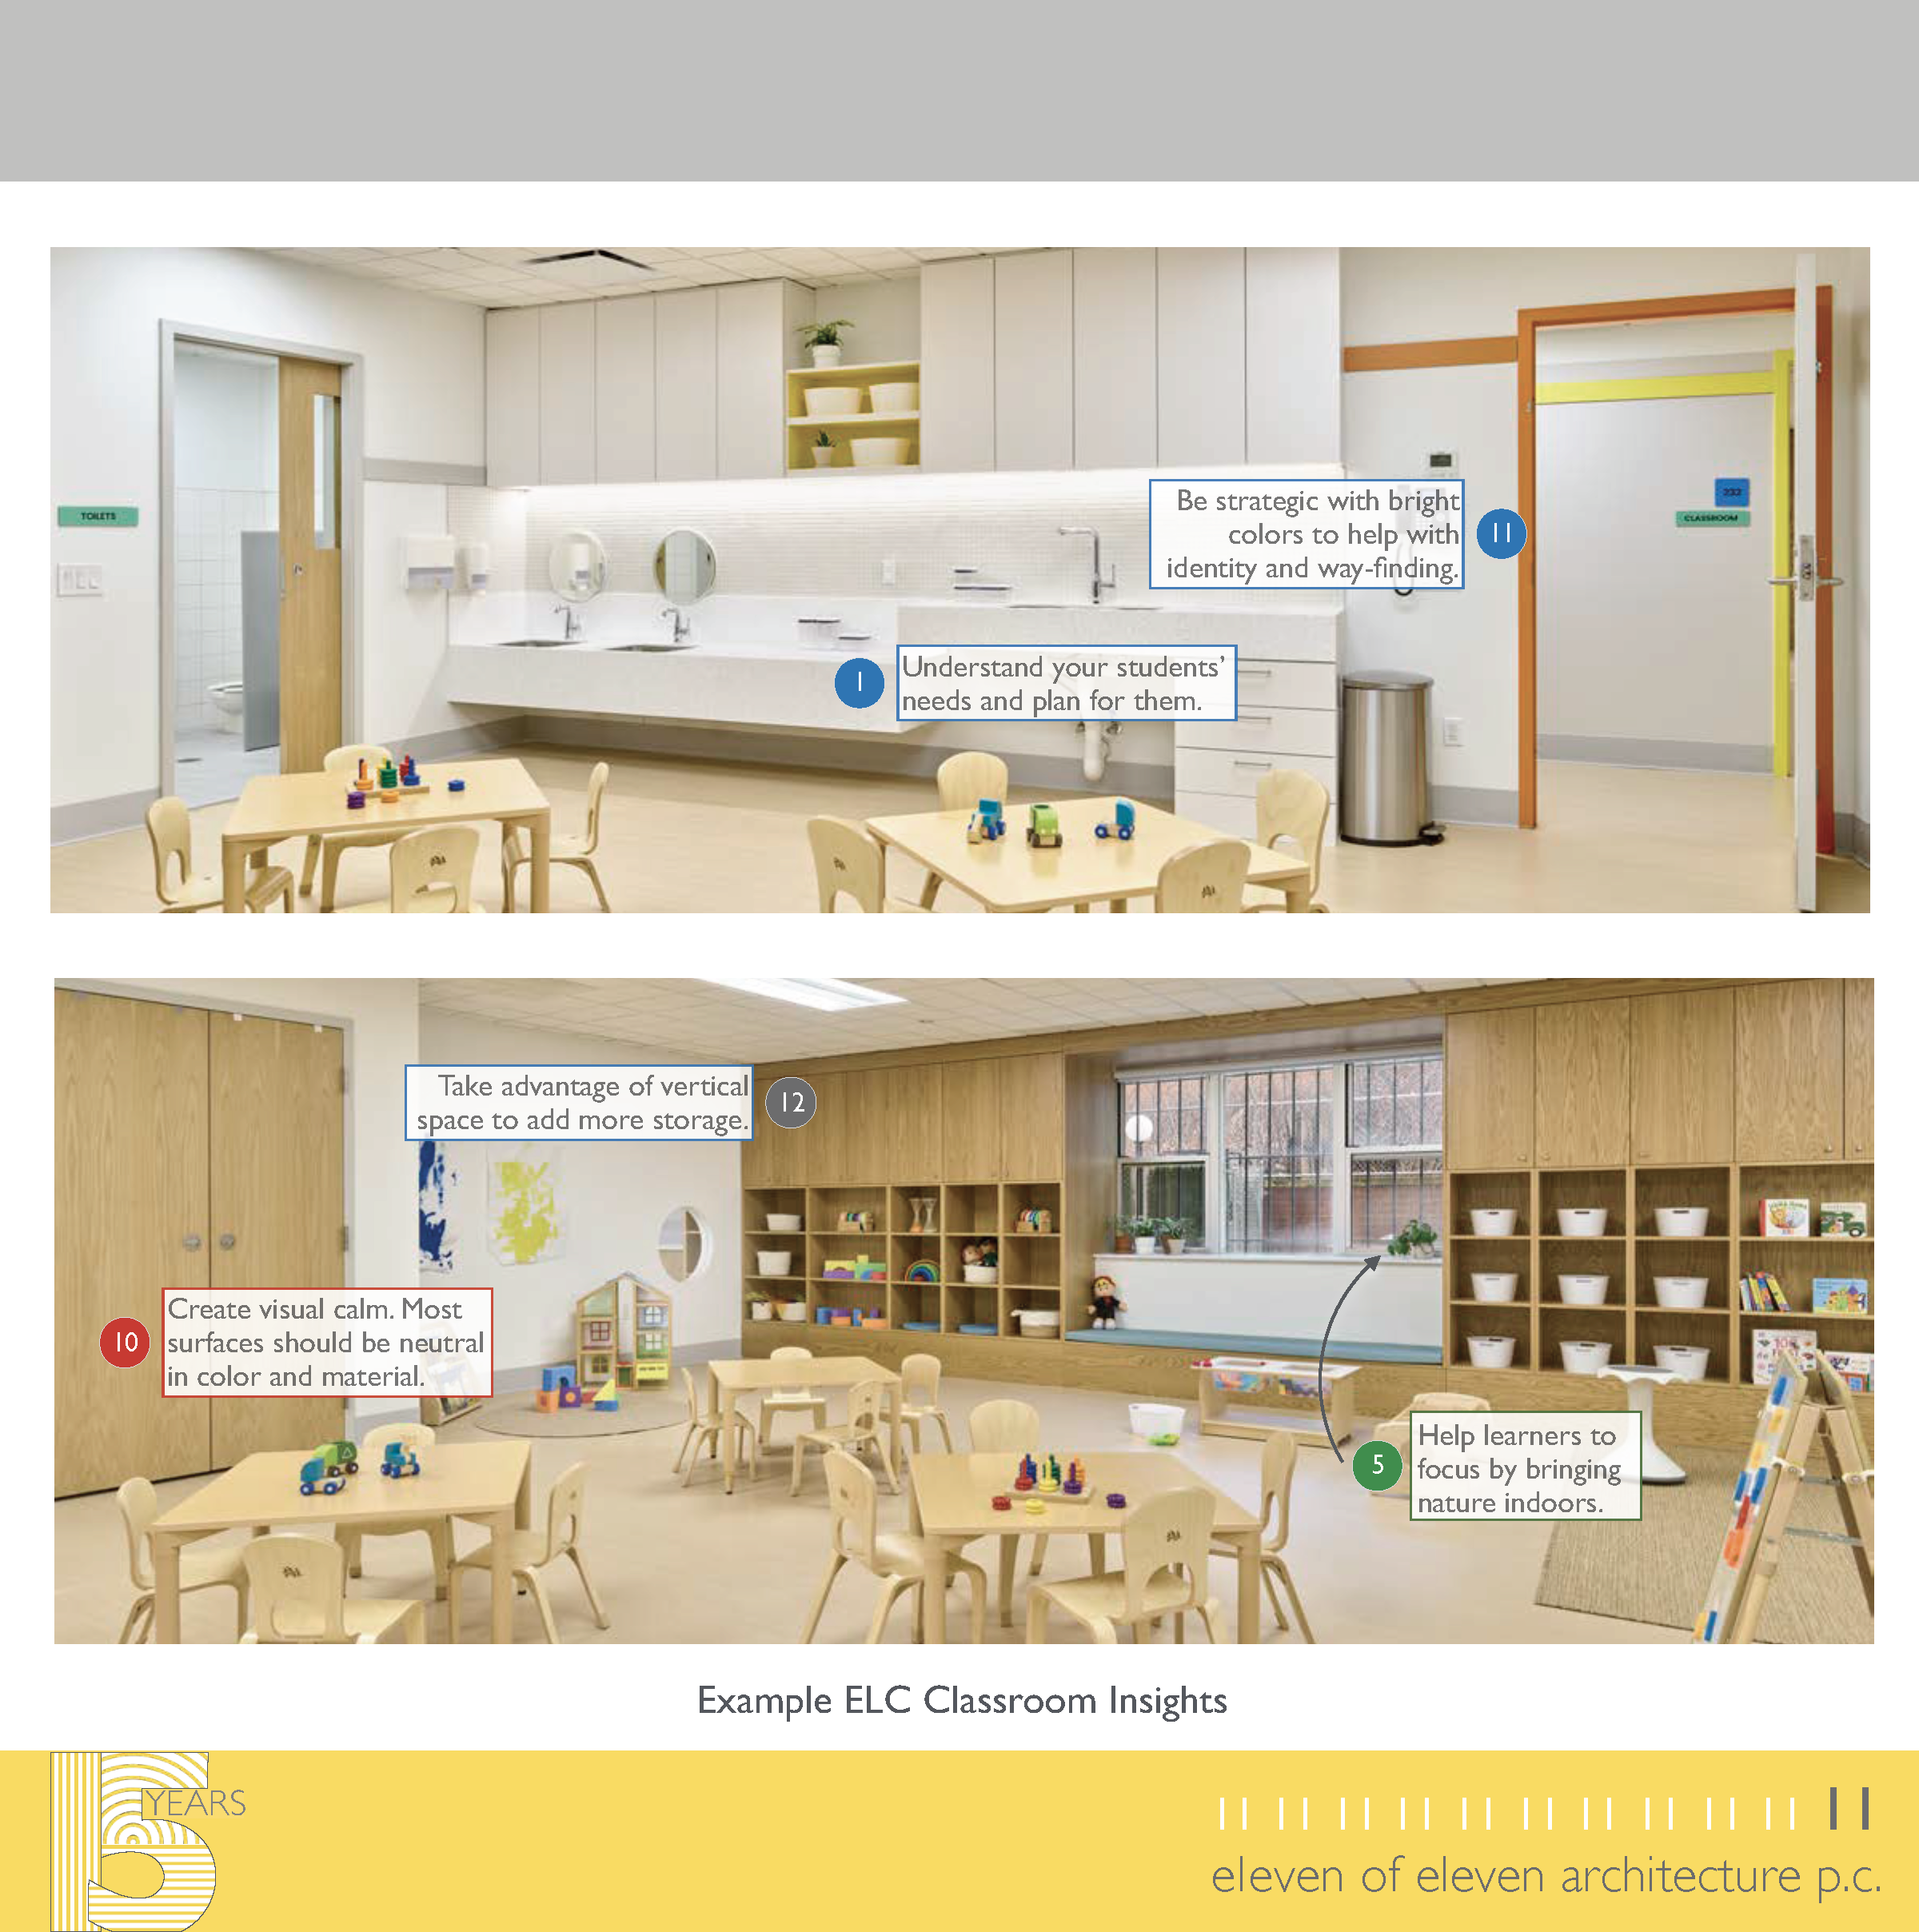 240415 15 Campaign Insights for Classroom Design_Page_2.png